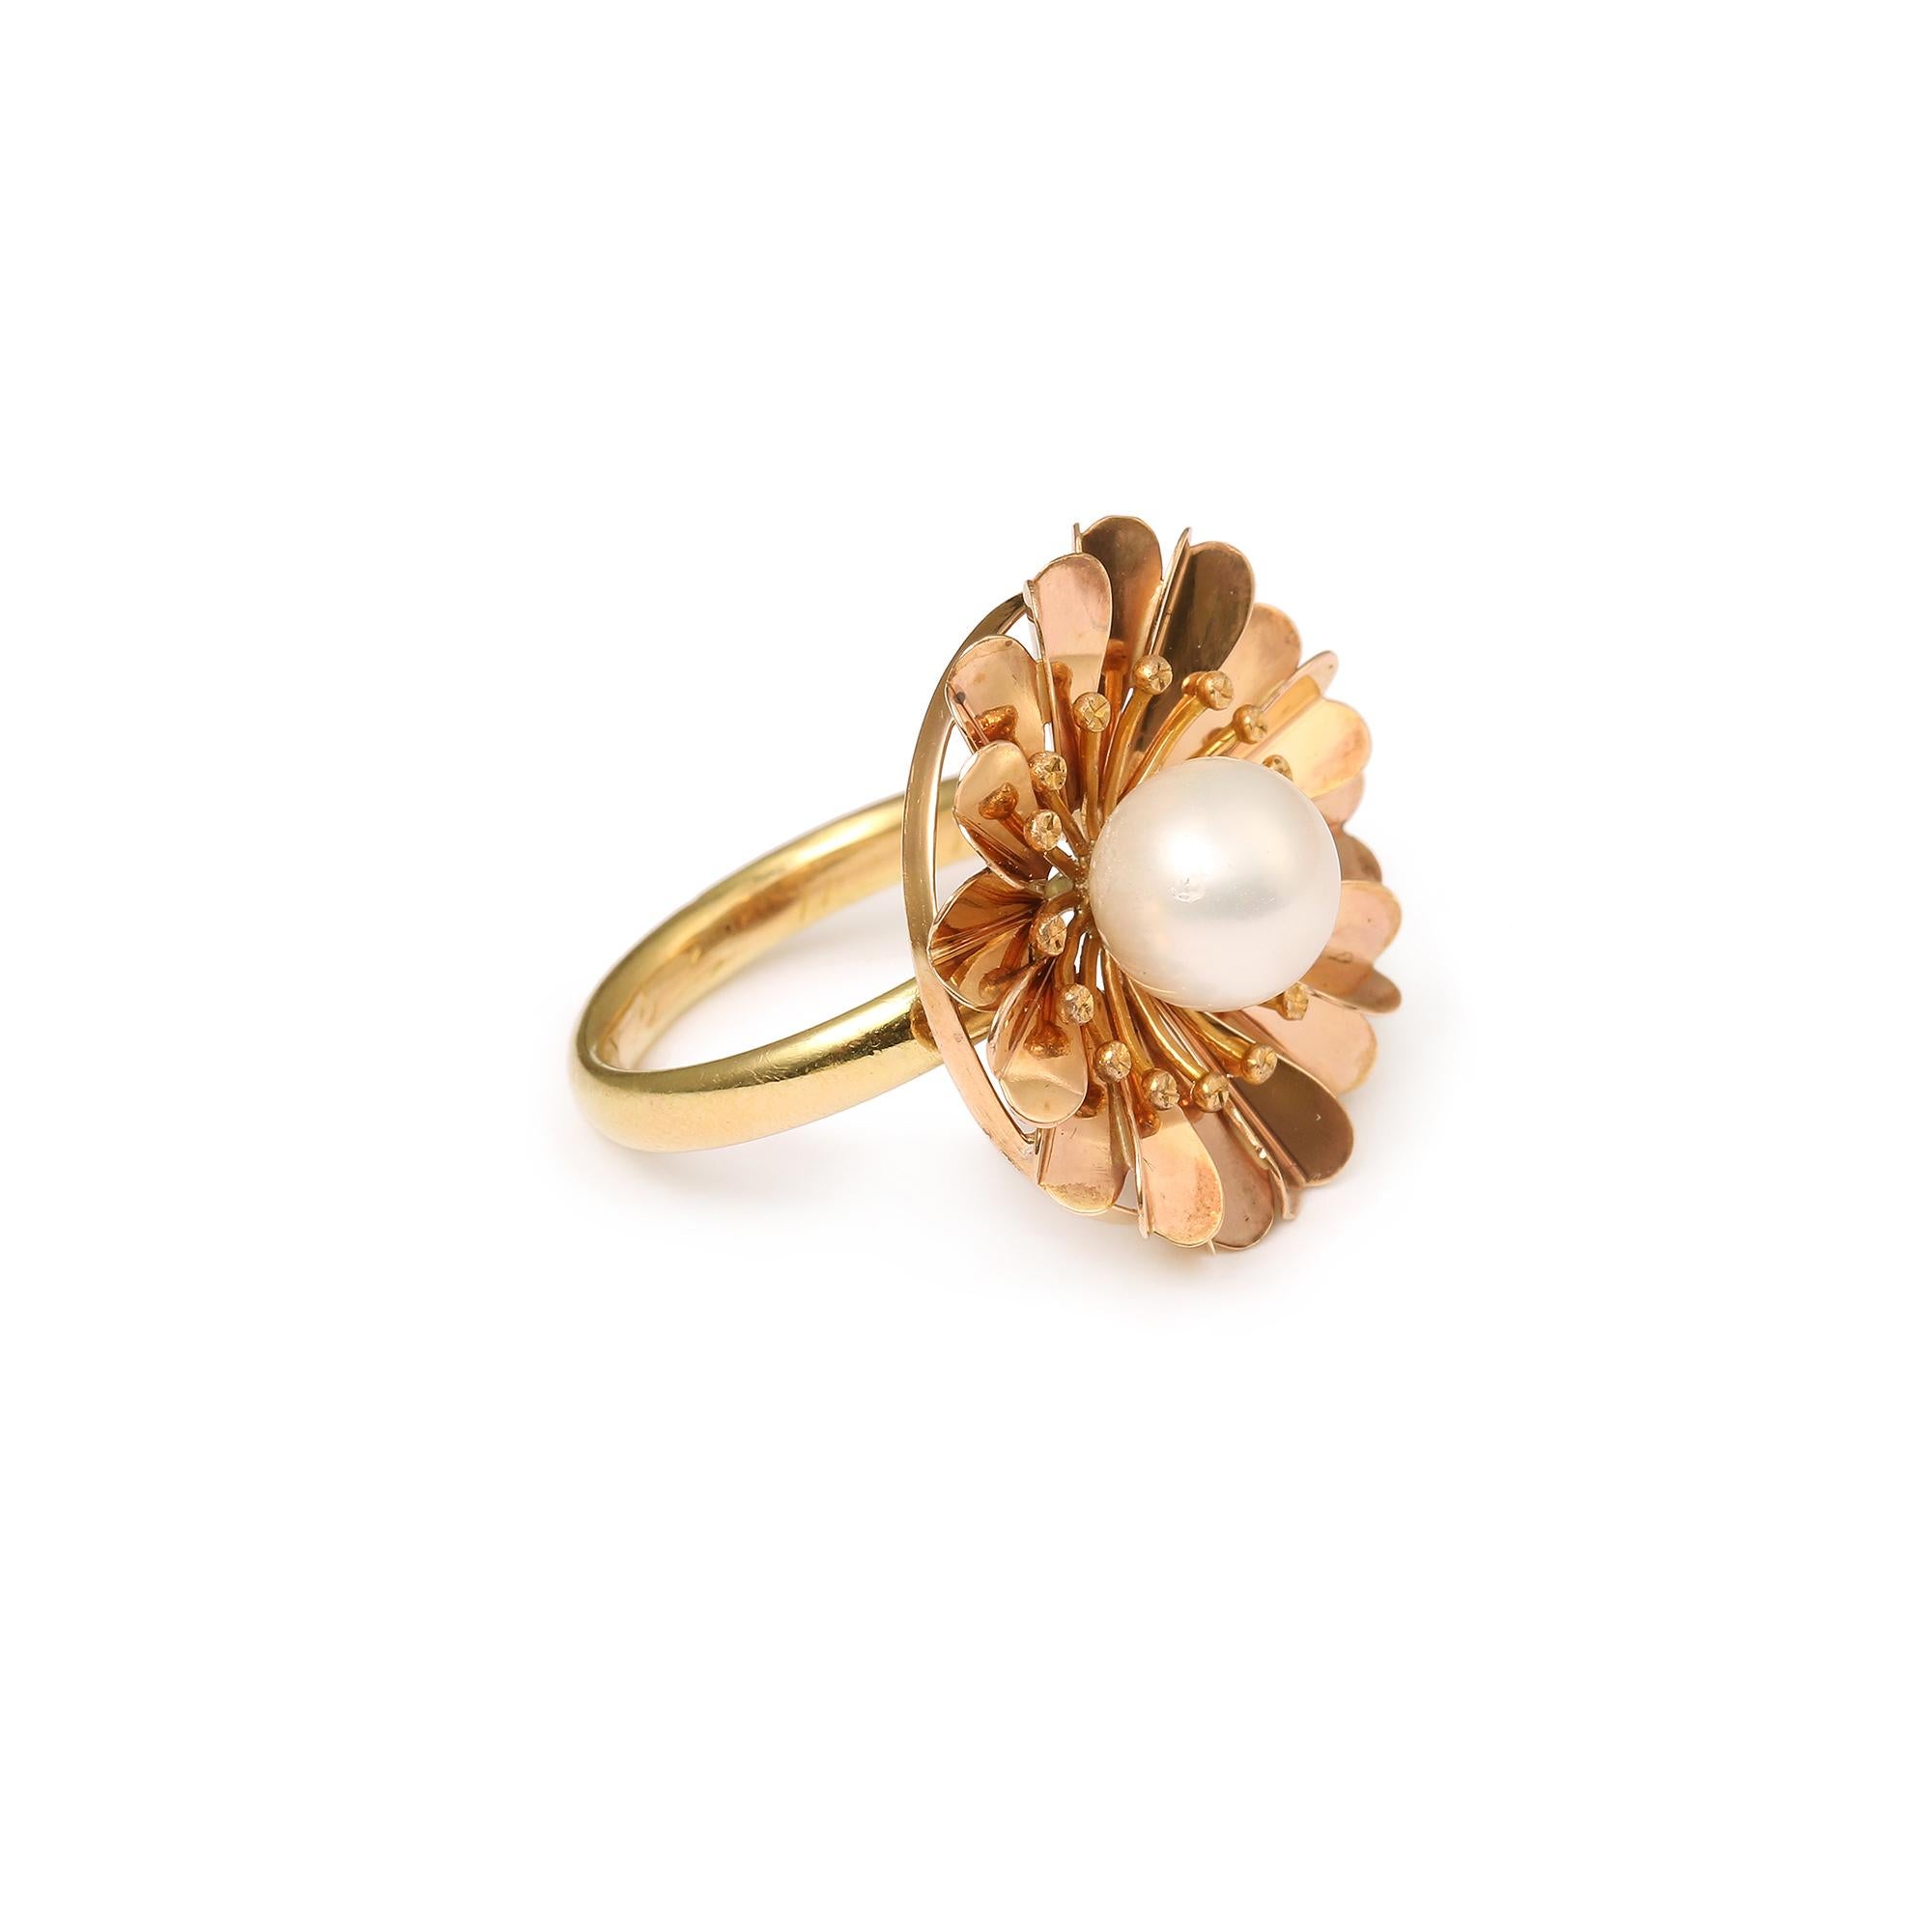 Pretty daisy cocktail ring set with a central white pearl.

The daisy is composed of 16 petals in rose gold, the ring body is in yellow gold.

Dimensions of the ring: 24.92 x 25.17 x 11.26 mm (0.945 x 0.984 x 0.433 inches)

Ring weight: 8.9 g

Pearl